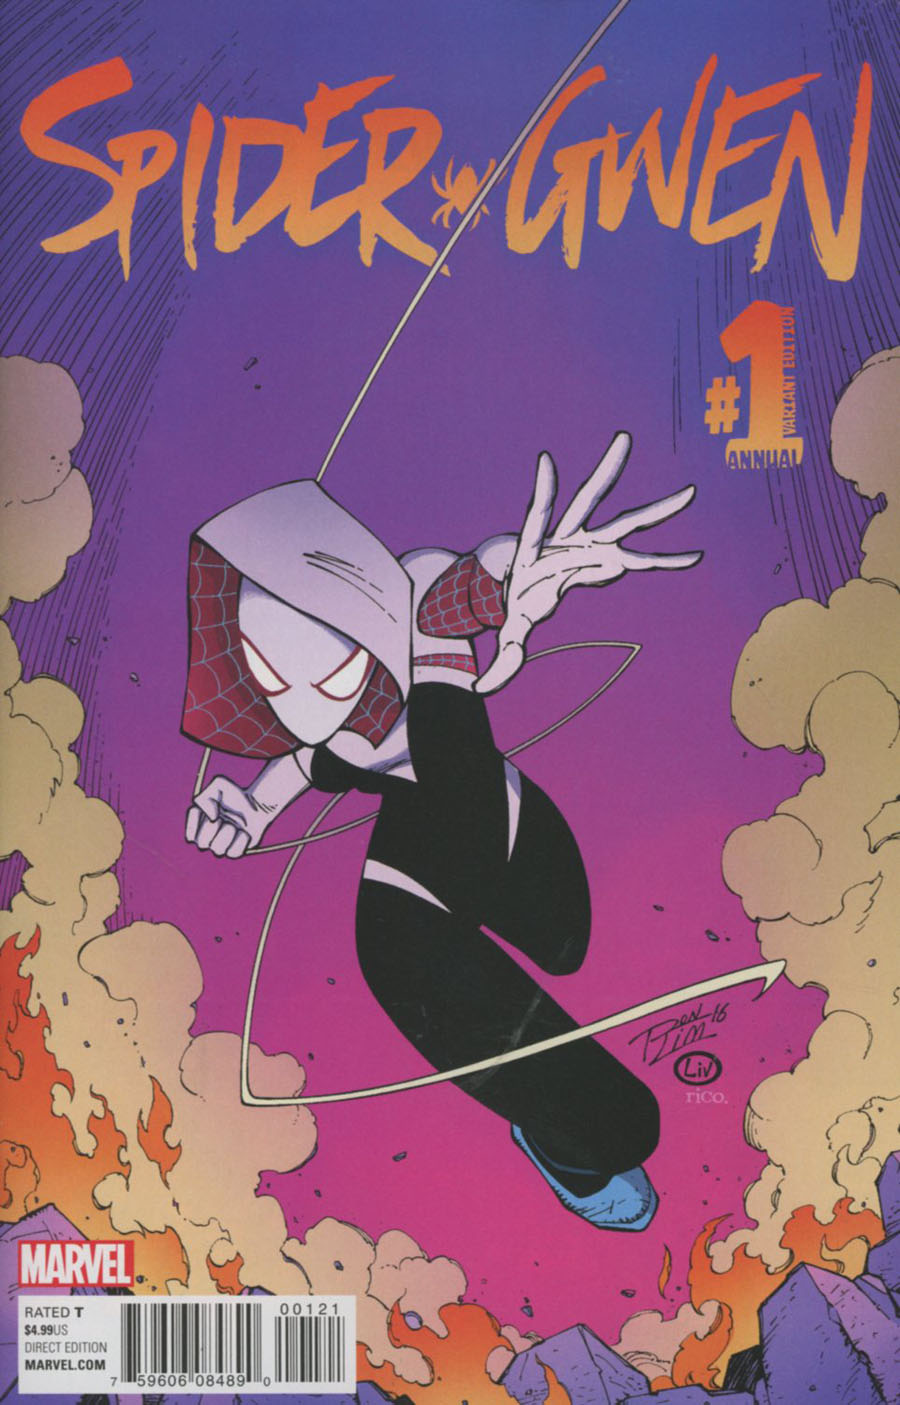 Spider-Gwen Vol 2 Annual #1 Cover B Variant Ron Lim Cover